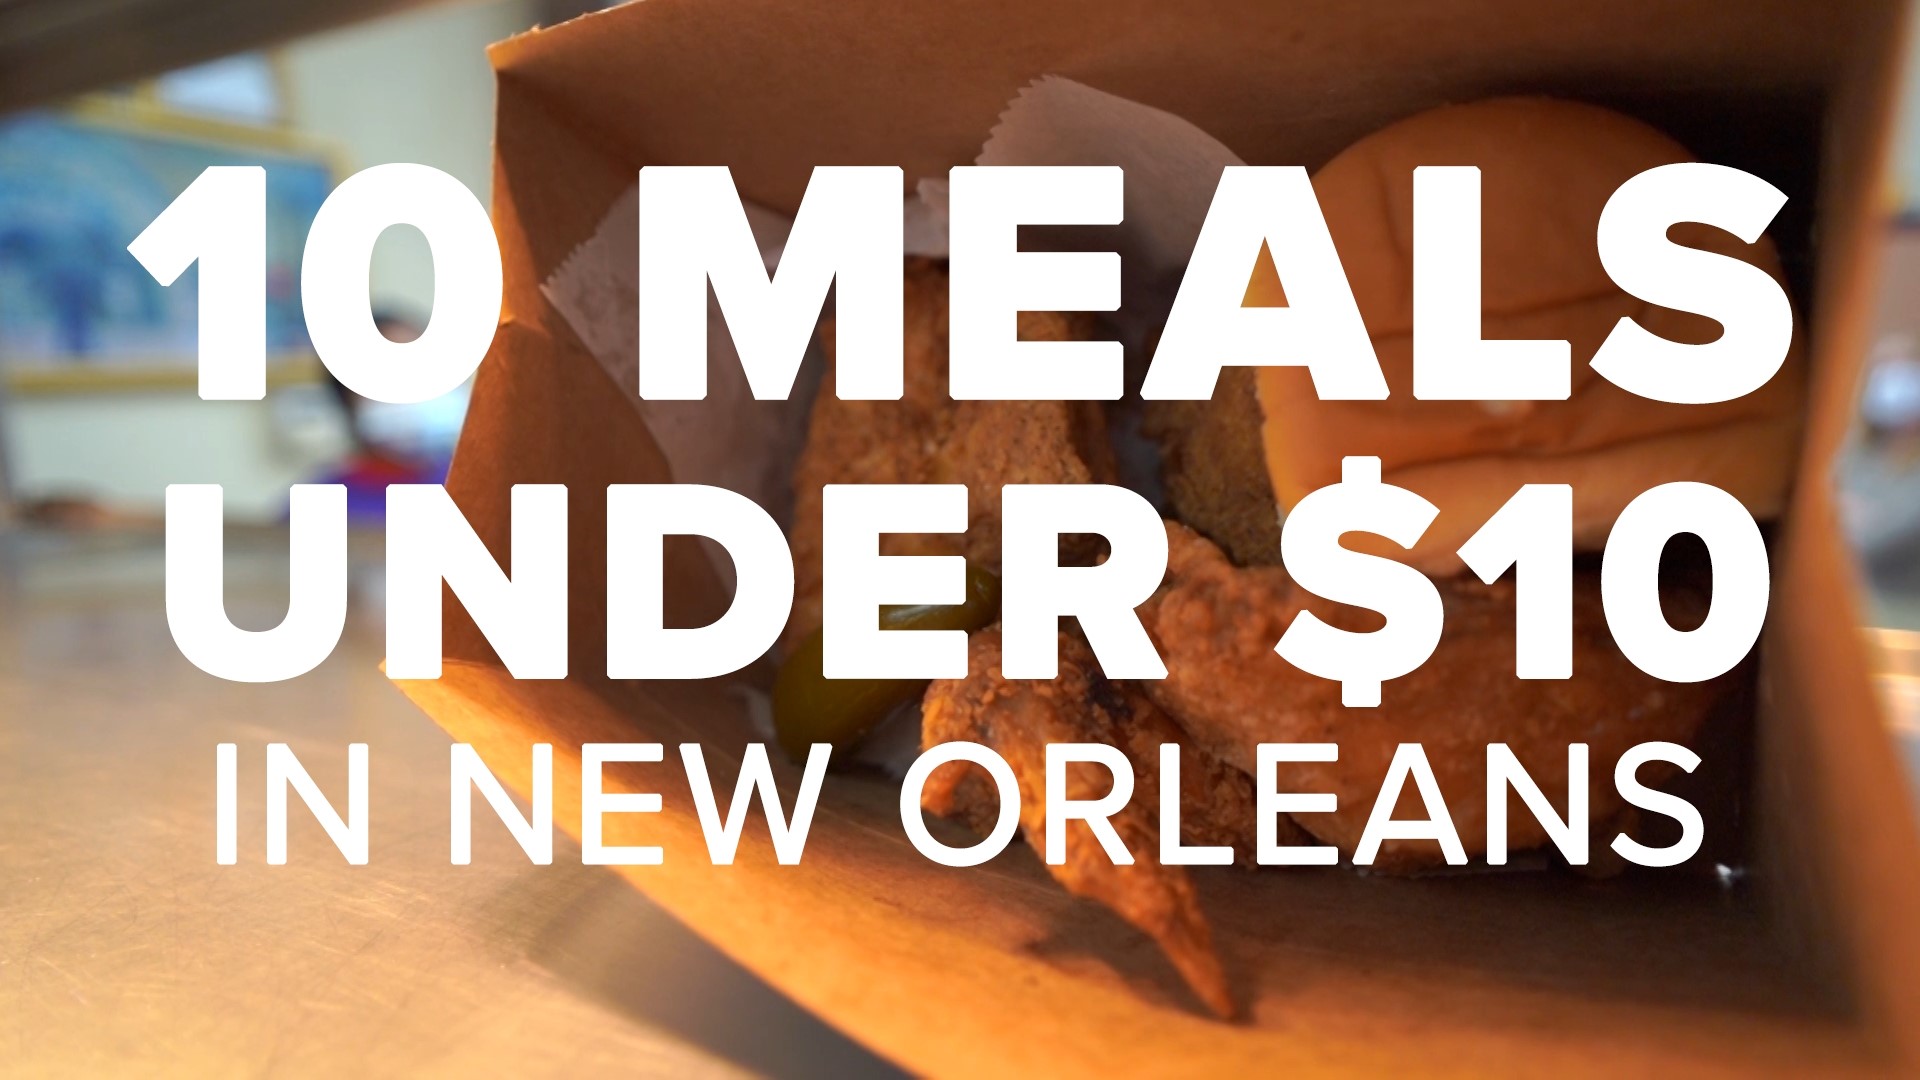 New Orleans has a reputation of good food at great prices. So we wanted to put that reputation to the test.